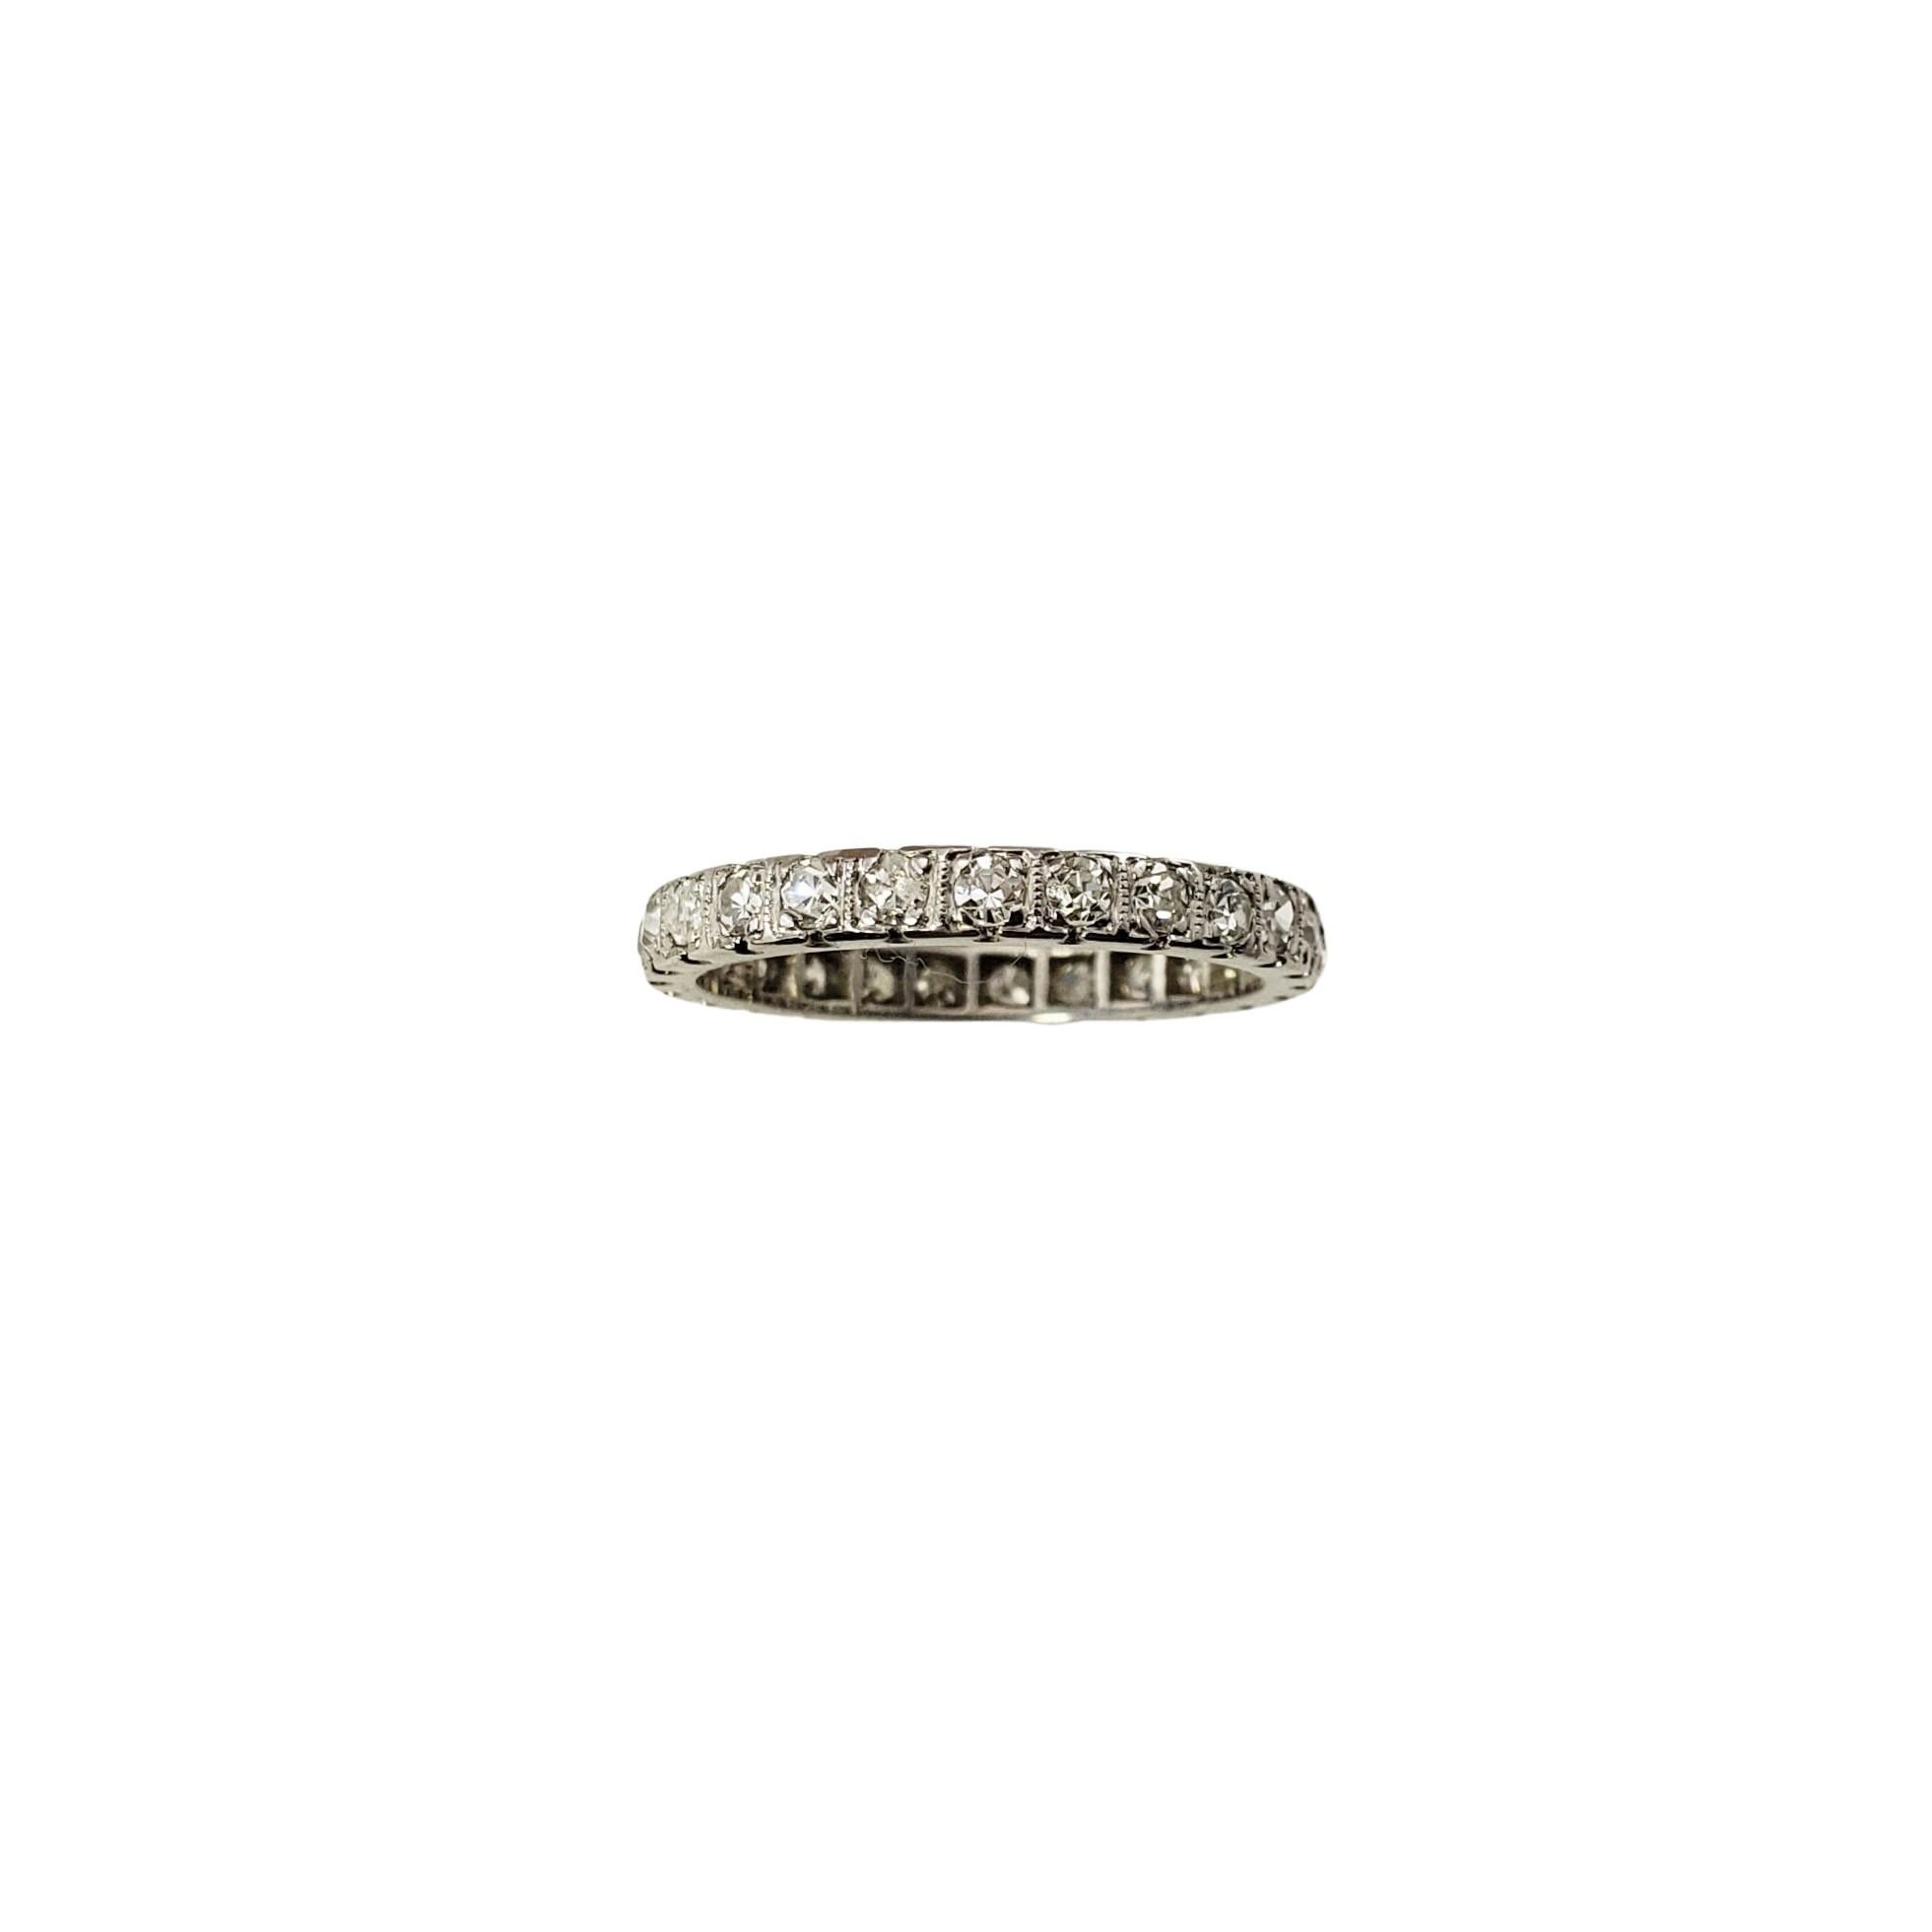 14 Karat White Gold and Diamond Eternity Band Ring Size 6-

This sparkling eternity band features 25 round single cut diamonds set in classic 14K white gold.  Width:  2 mm.

Approximate total diamond weight:  .50 ct.

Diamond color: I-J

Diamond